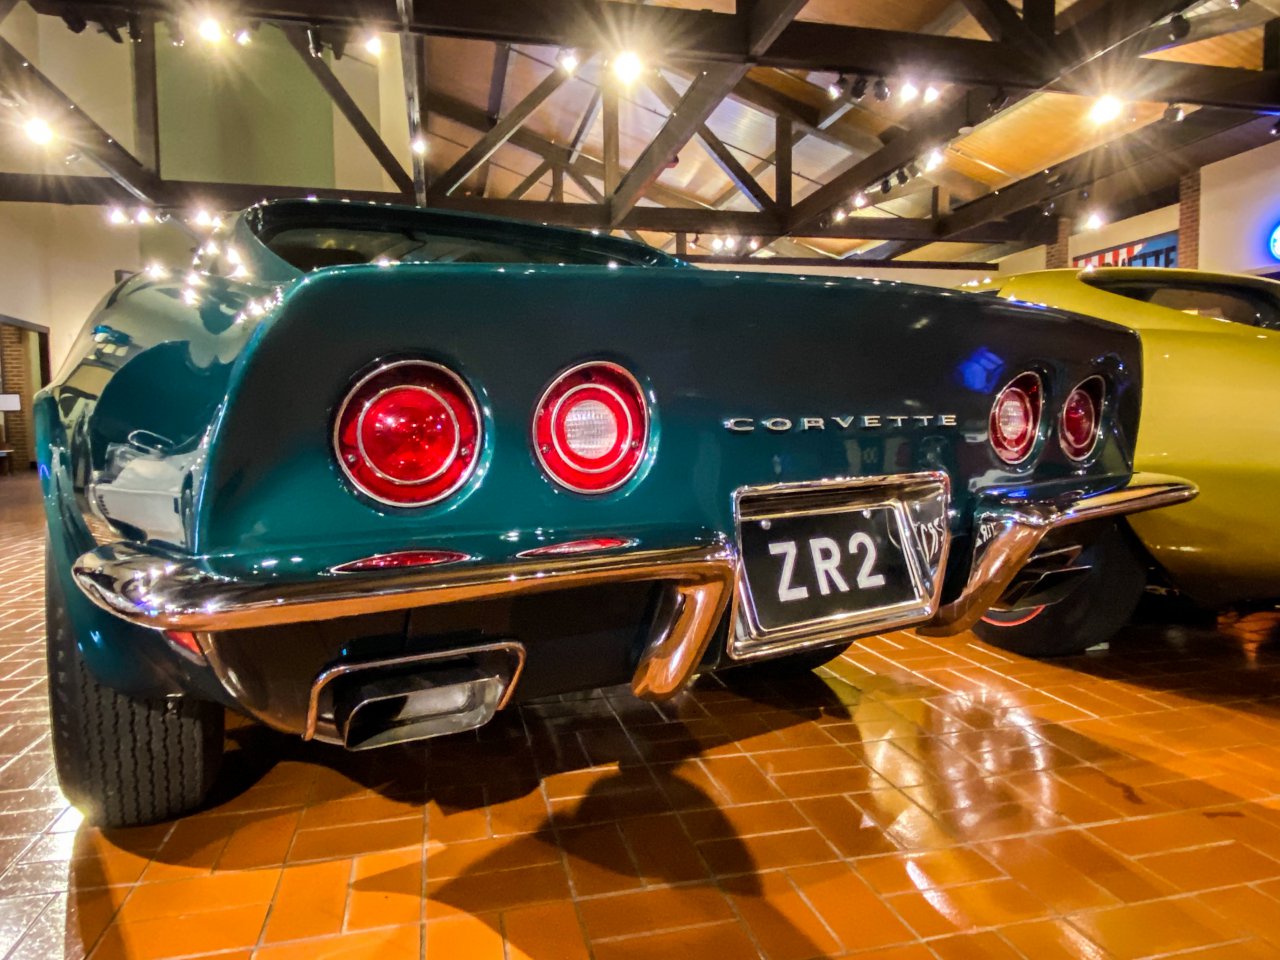 Corvette, Gilmore celebrates Corvette with featured main-gallery display, ClassicCars.com Journal